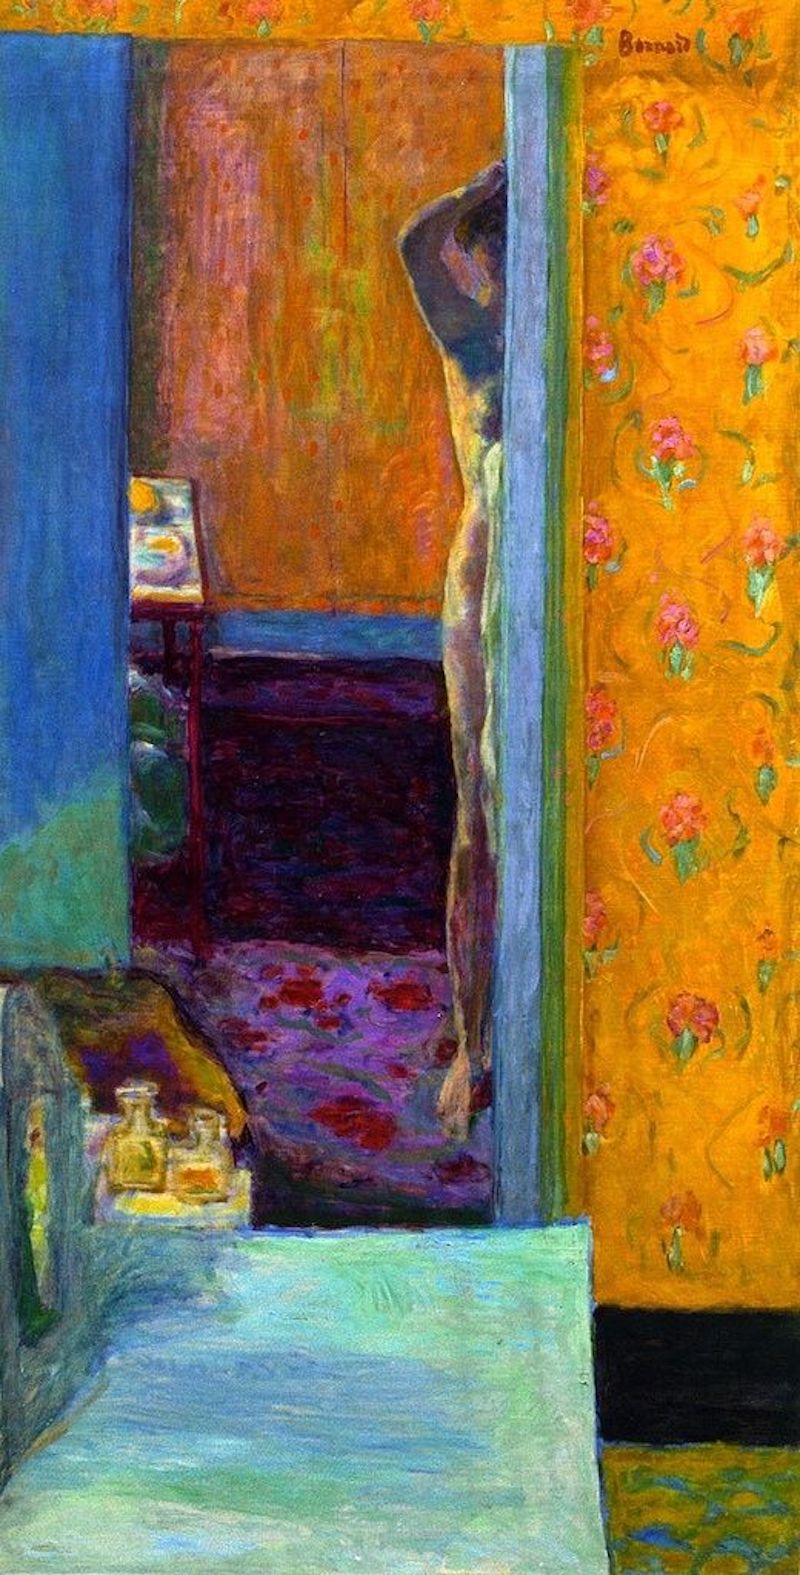 Nude in an Interior by Pierre Bonnard - 1935 - 290 x 360 cm National Gallery of Art